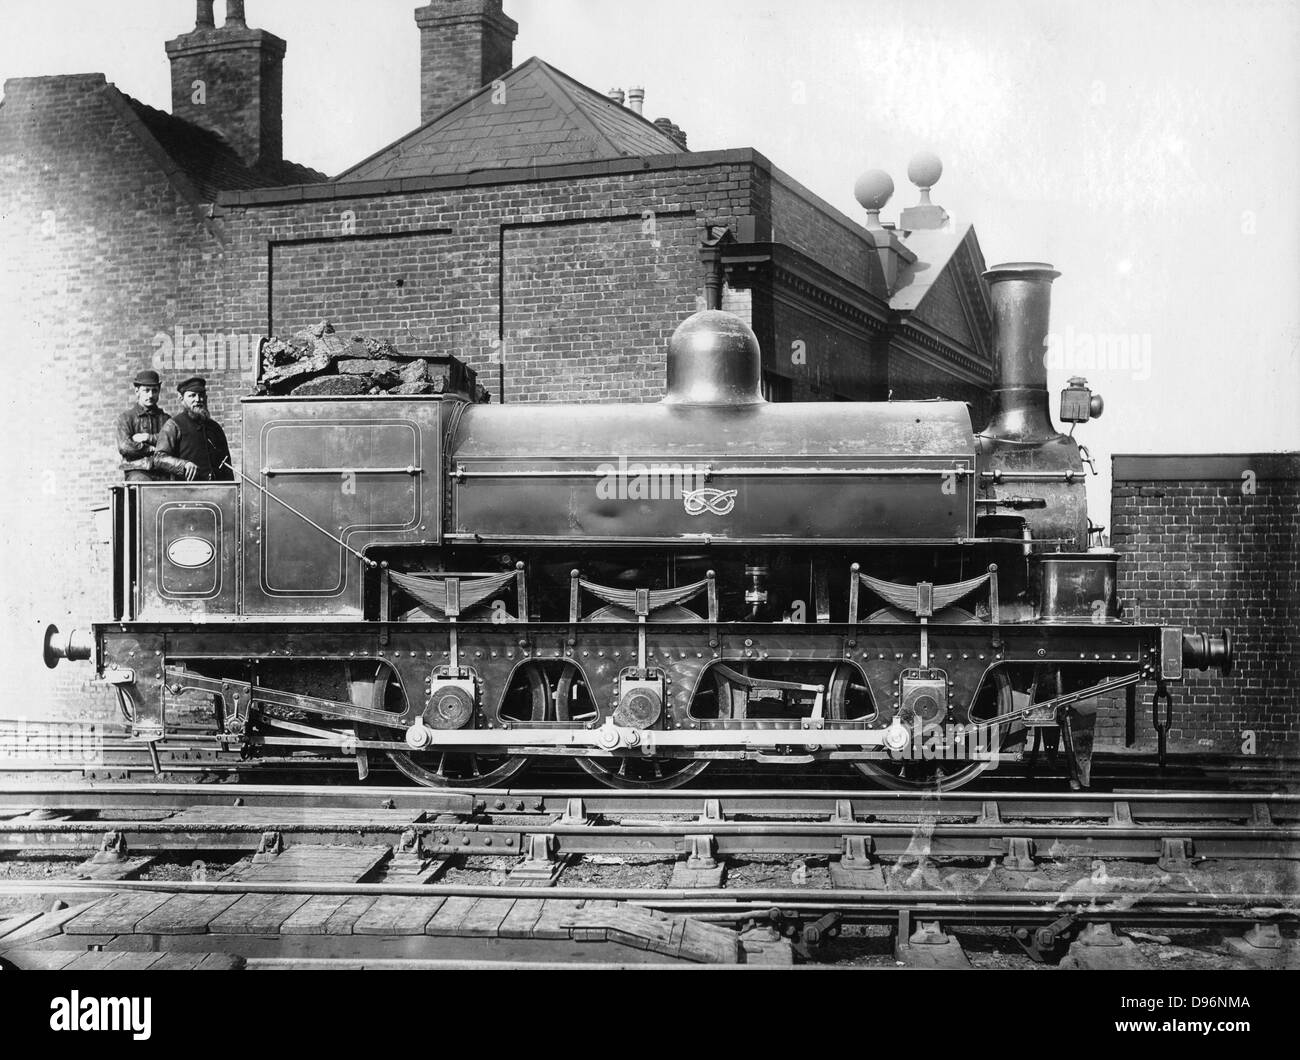 North Staffordshire 0-6-0 steam locomotive with driver and fireman on the footplate. 19th century. Photograph. Stock Photo